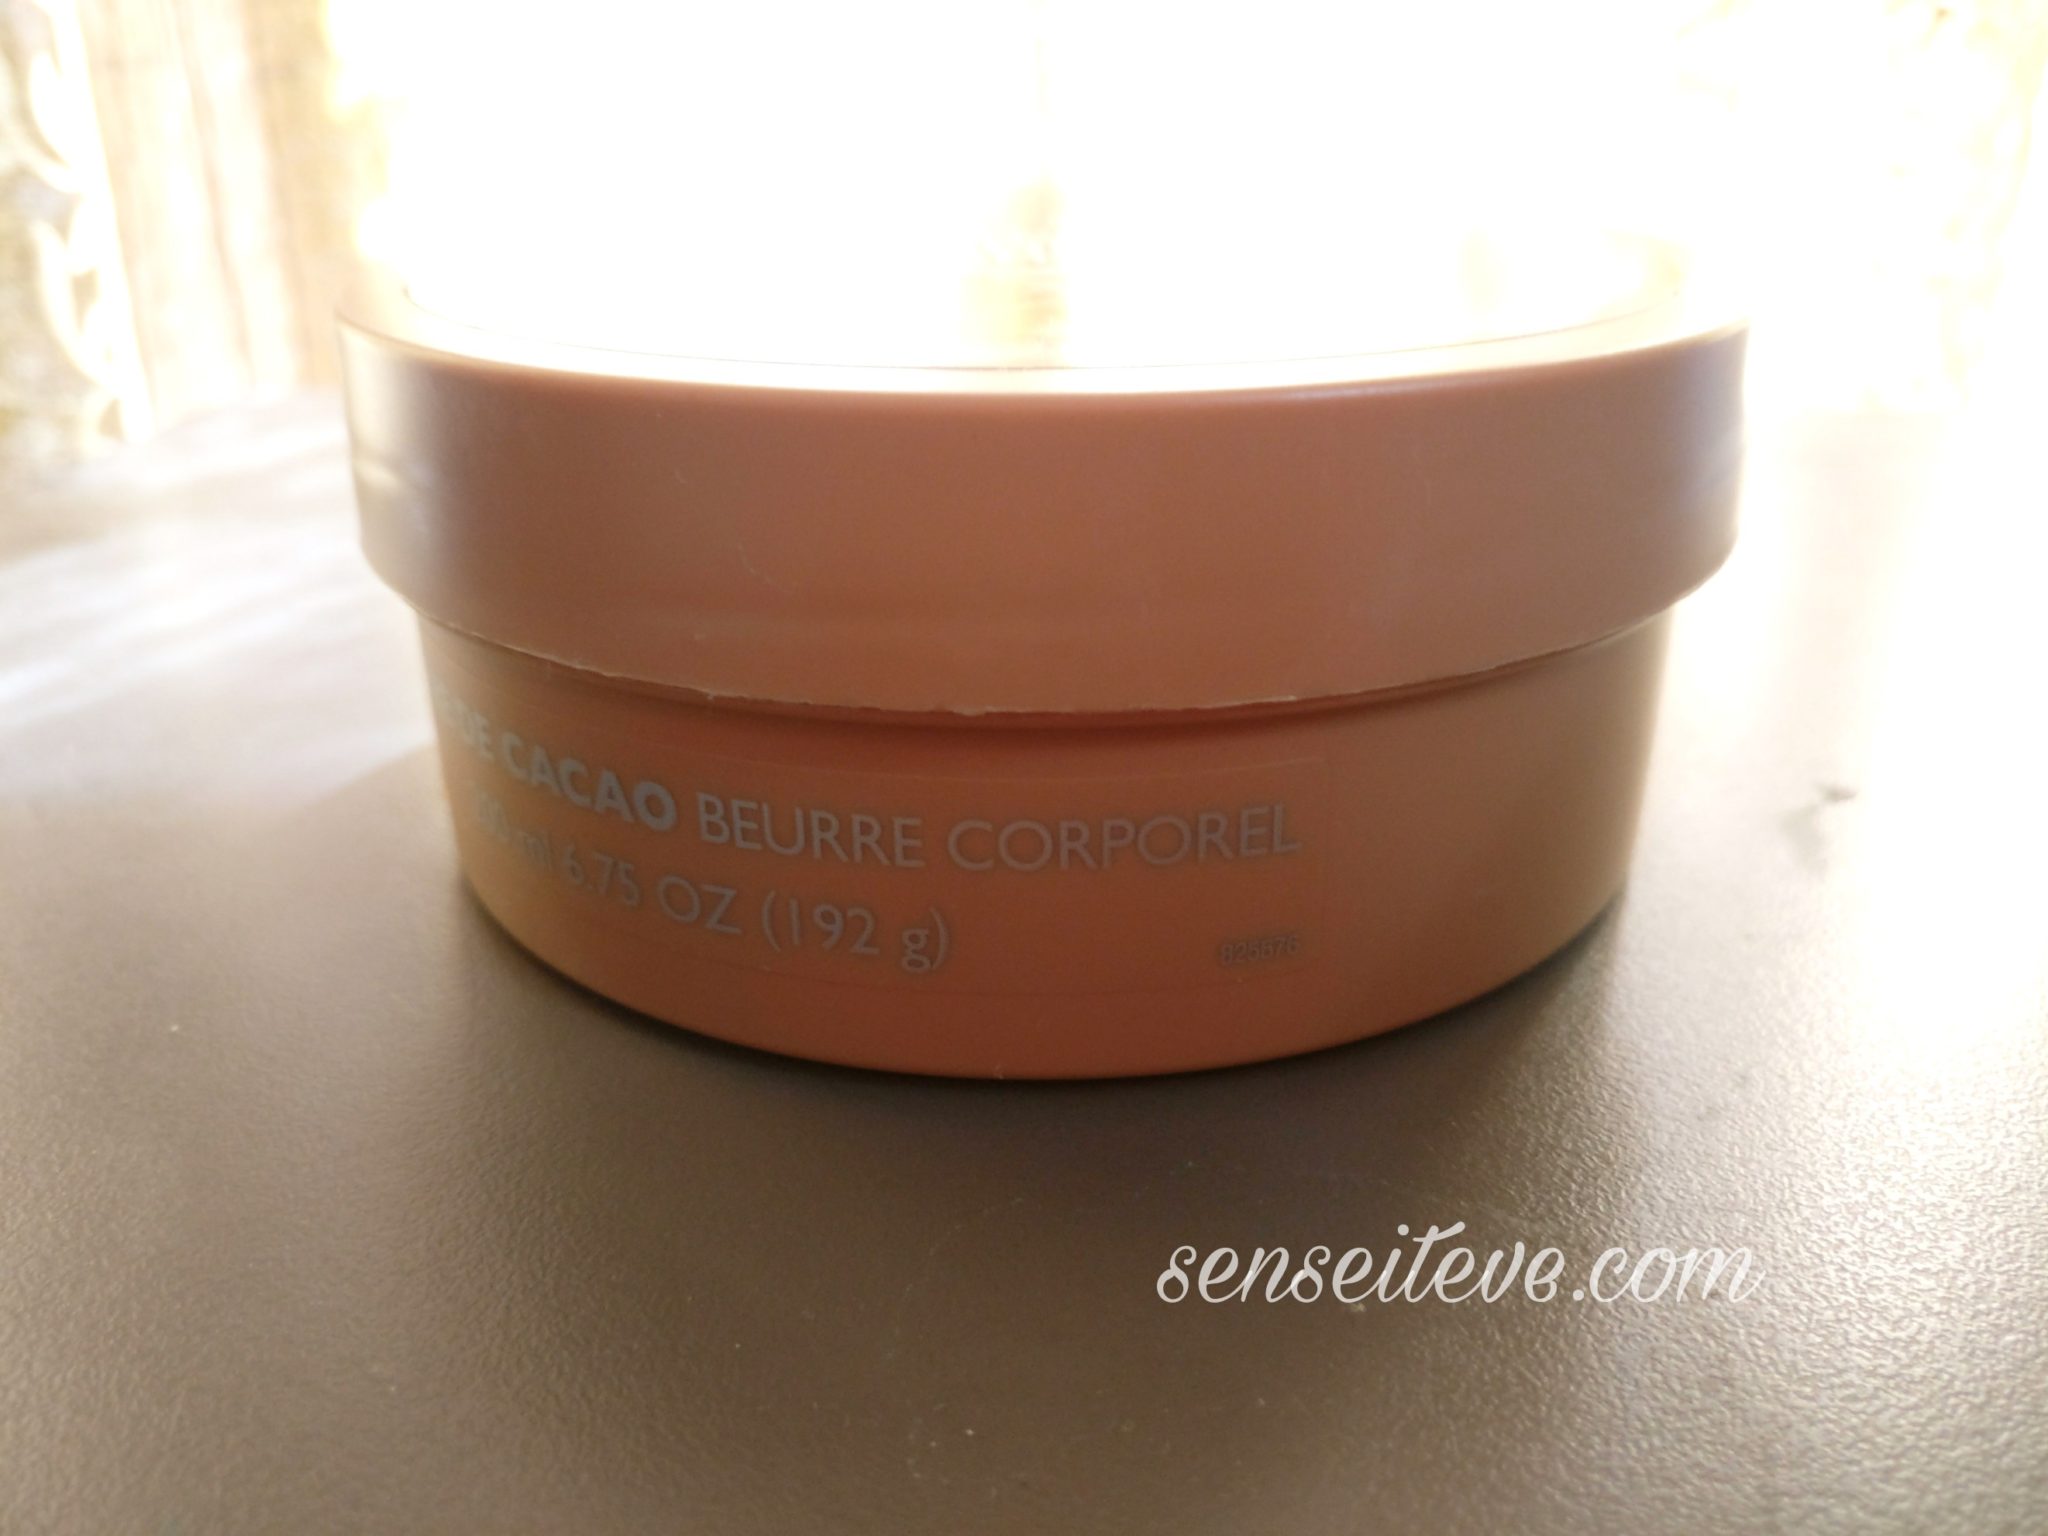 TBS Cocoa Butter Body Butter Sense It Eve The Body Shop Cocoa Butter Body Butter Review